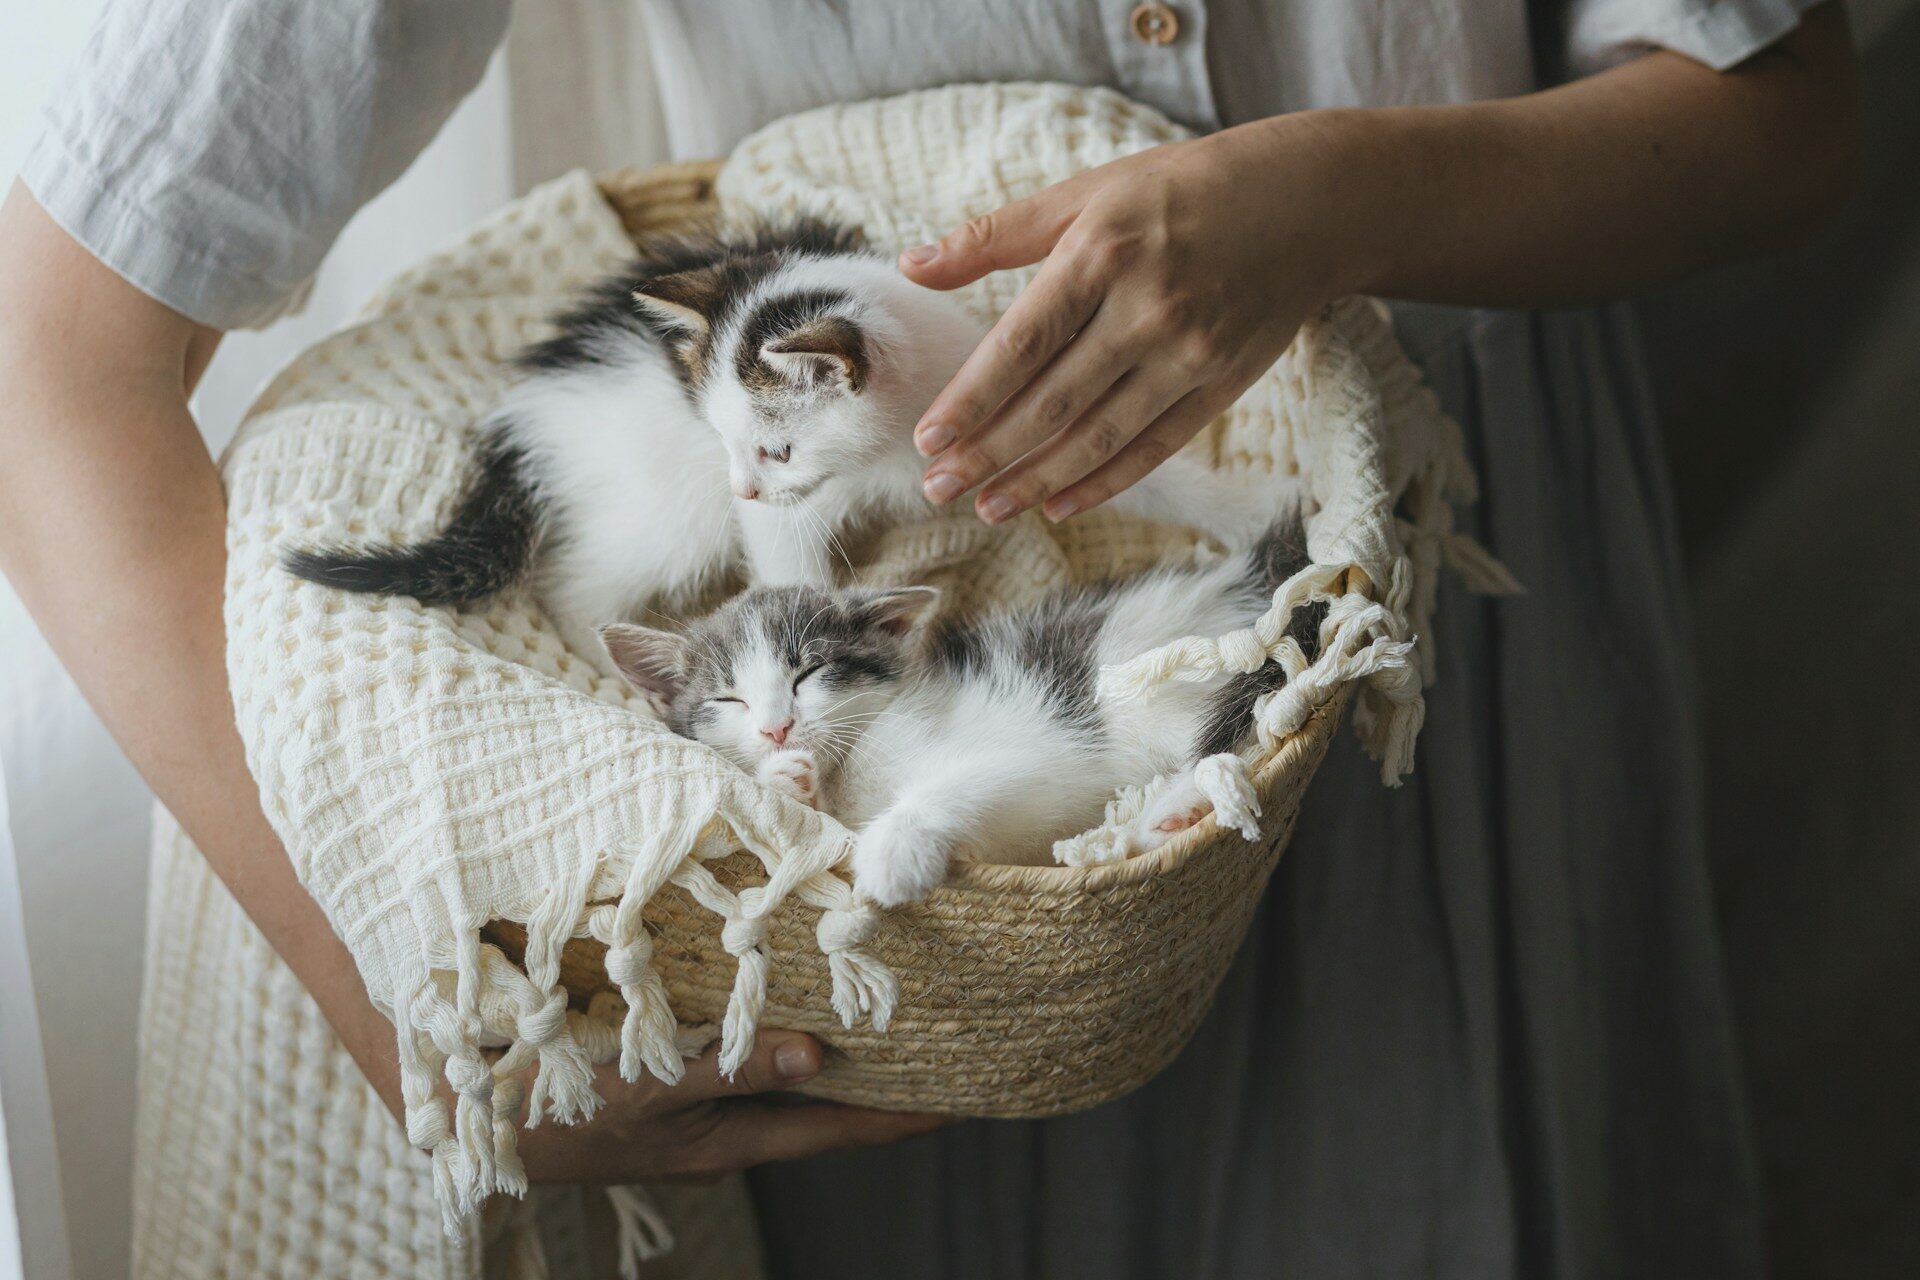 A woman holding a basket with two black and white kittens